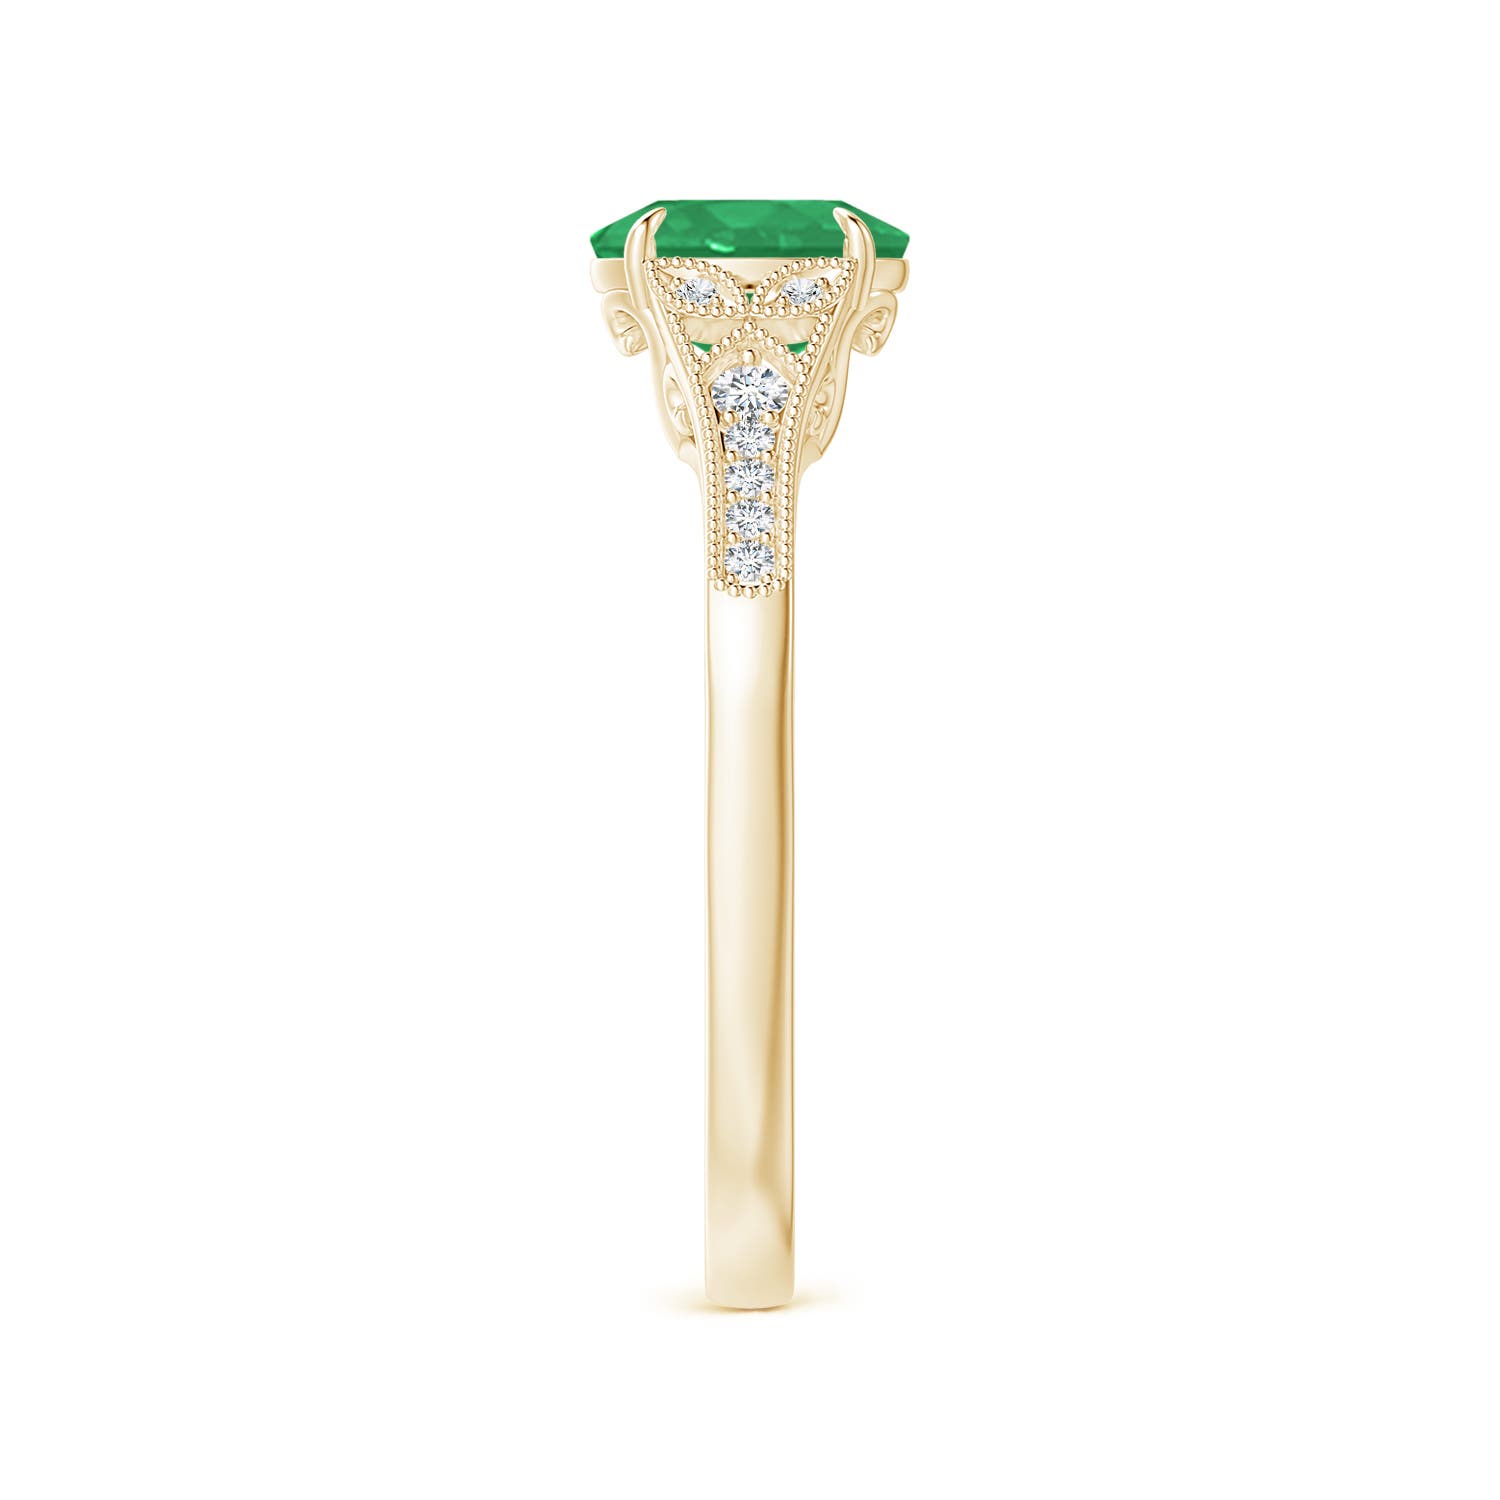 A - Emerald / 0.77 CT / 14 KT Yellow Gold